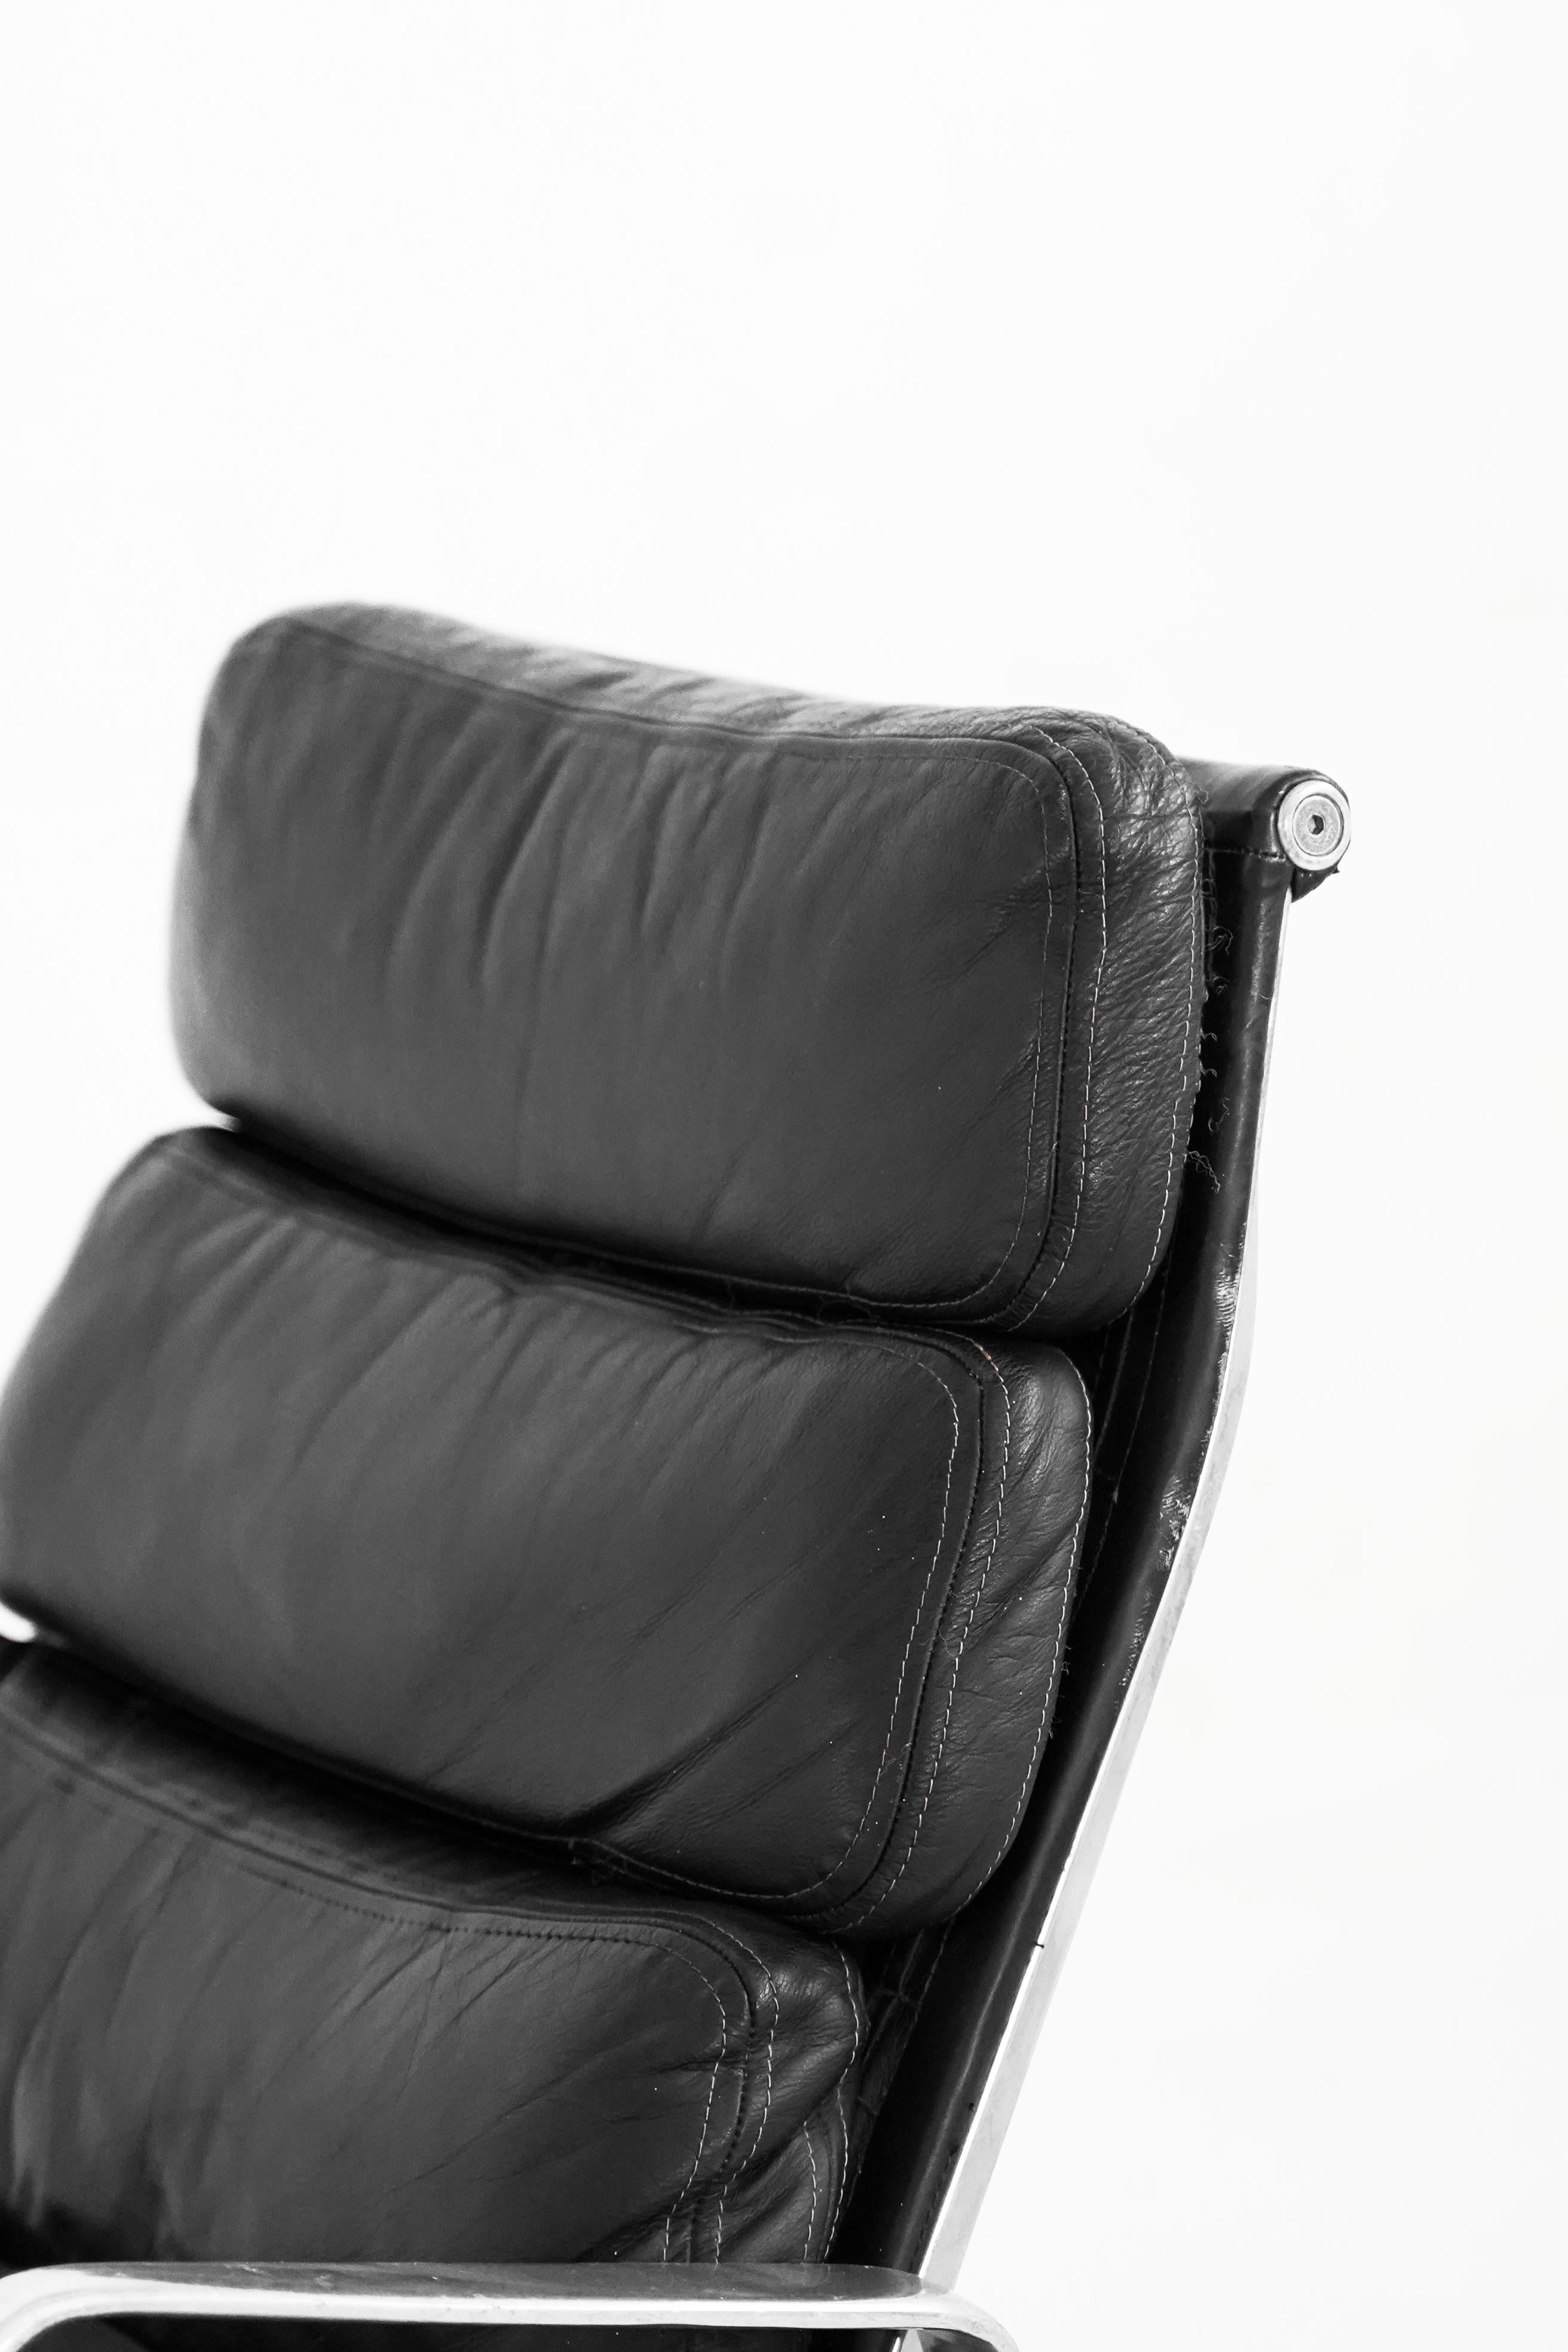 American Eames Soft Pad Lounge Chair by Charles and Ray Eames for Herman Miller